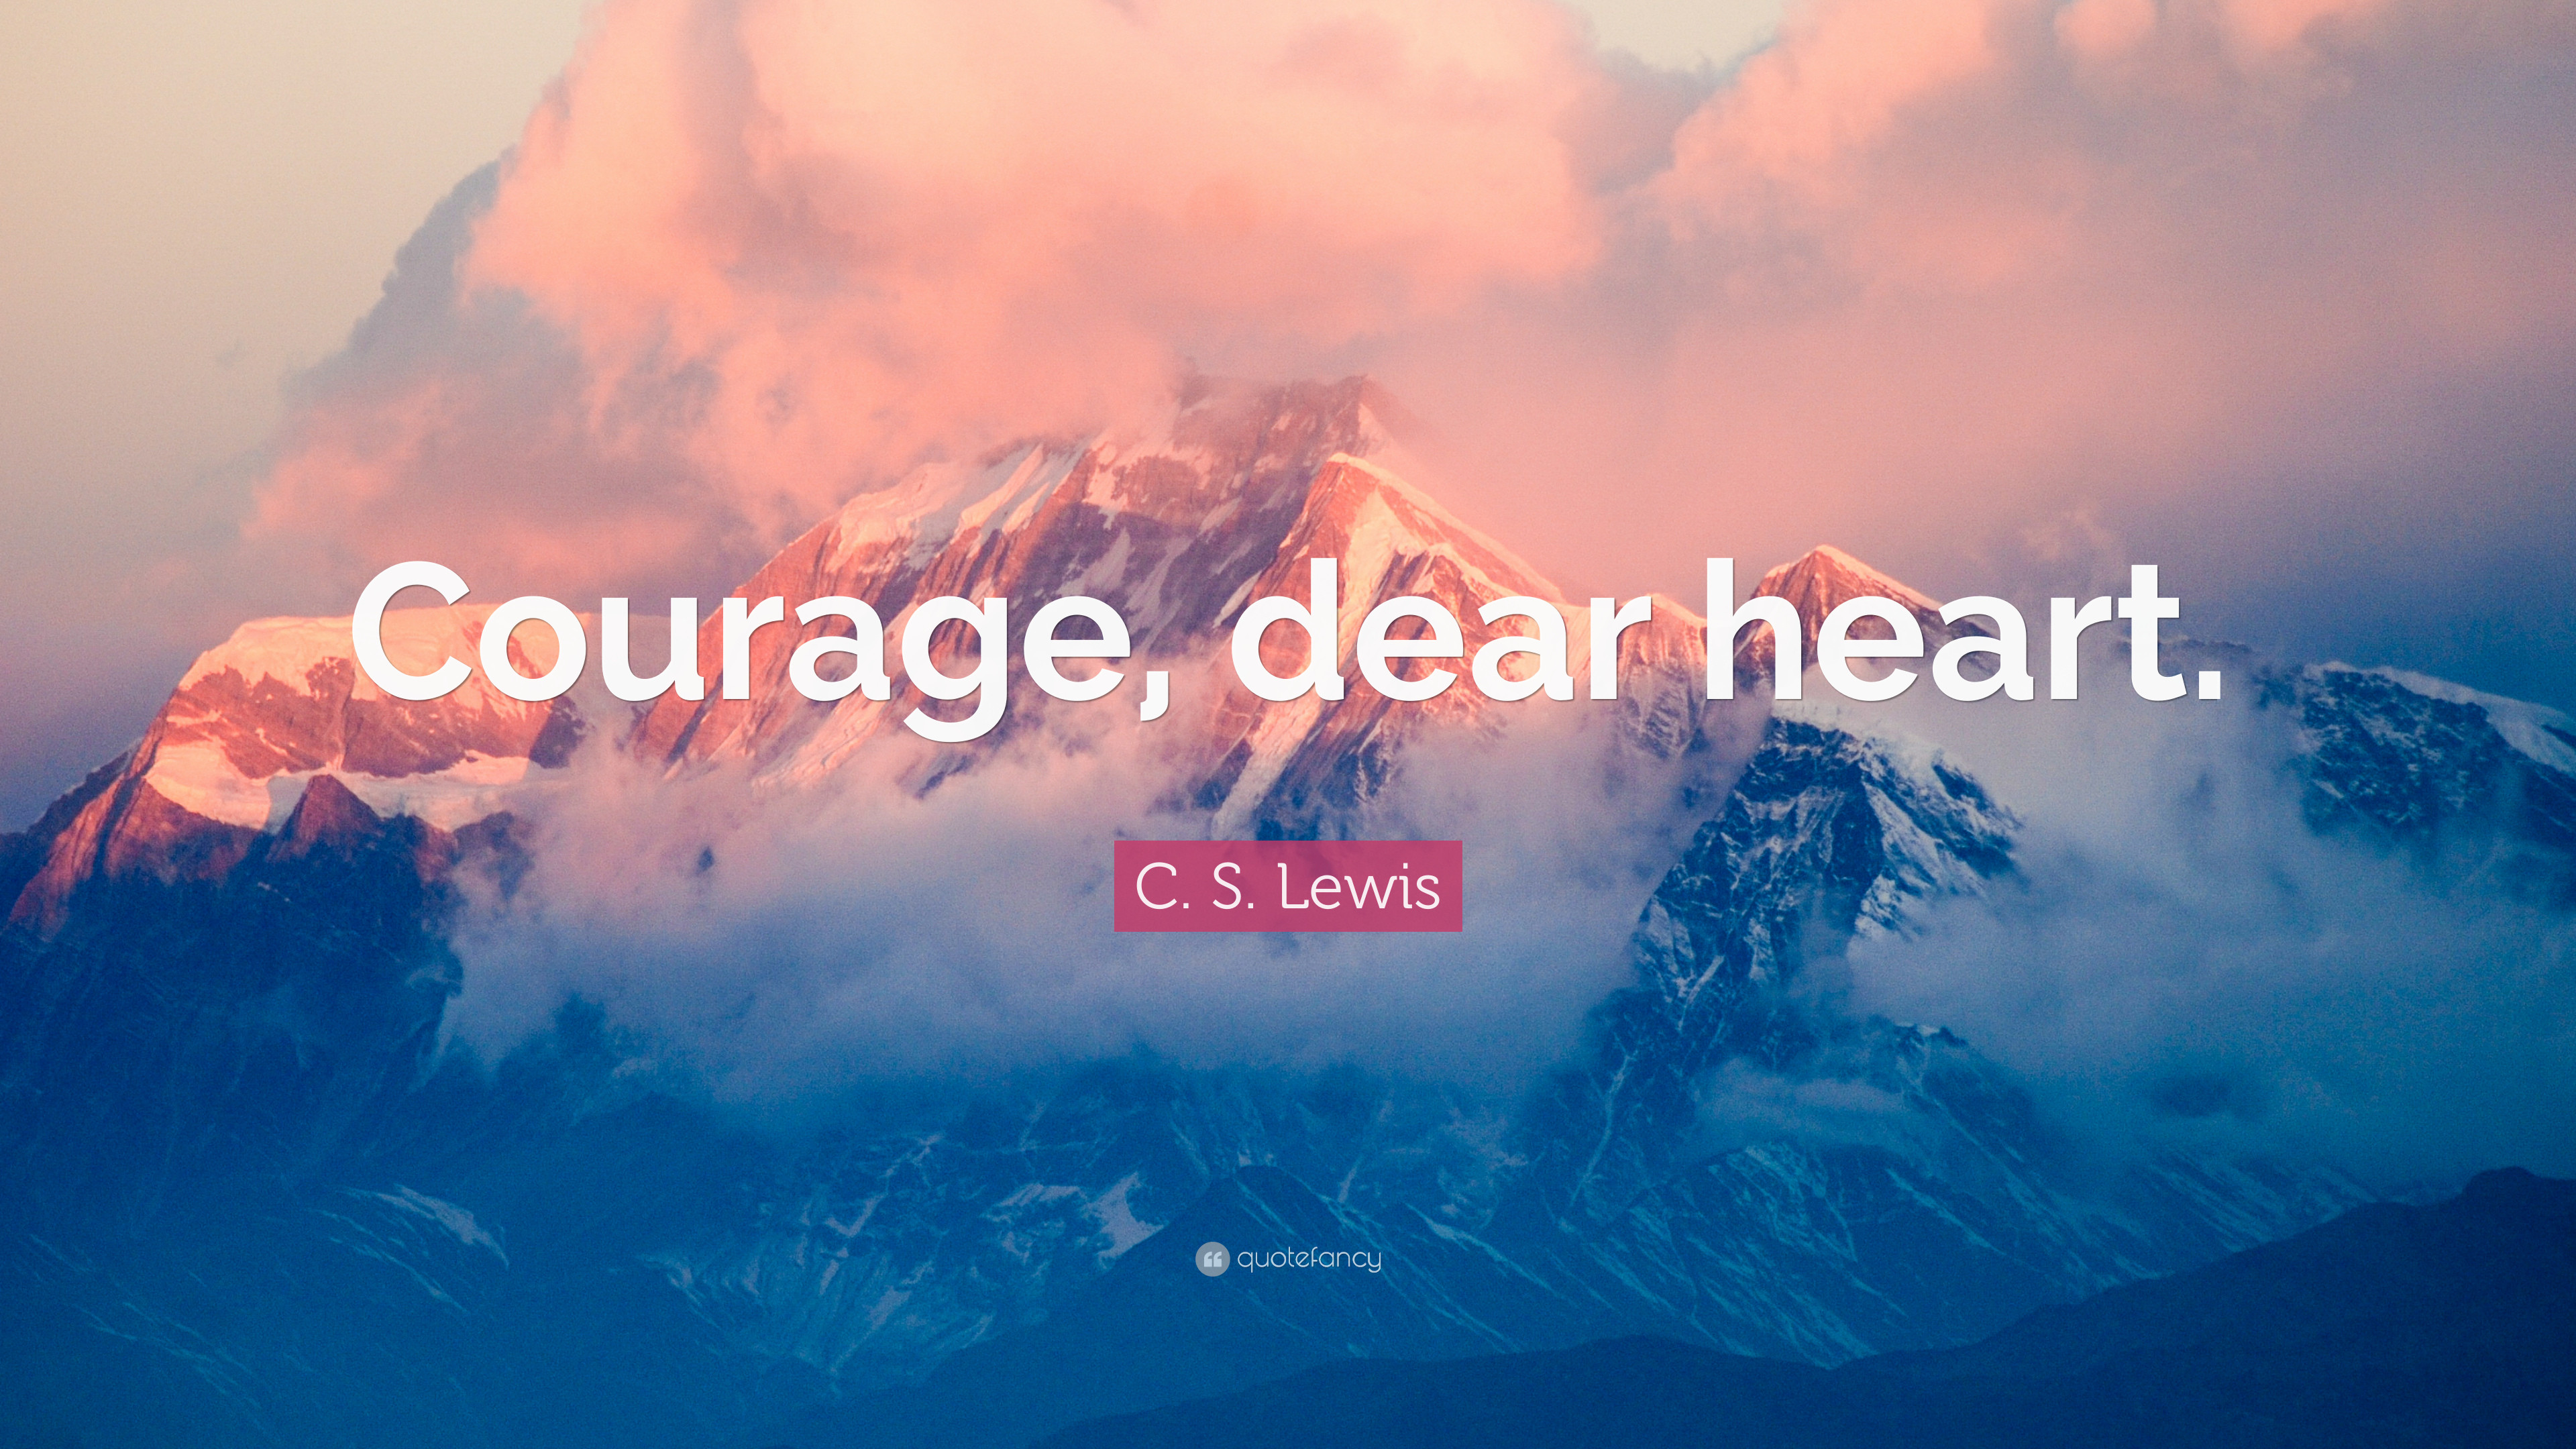 3840x2160 C. S. Lewis Quote: “Courage, dear heart.”